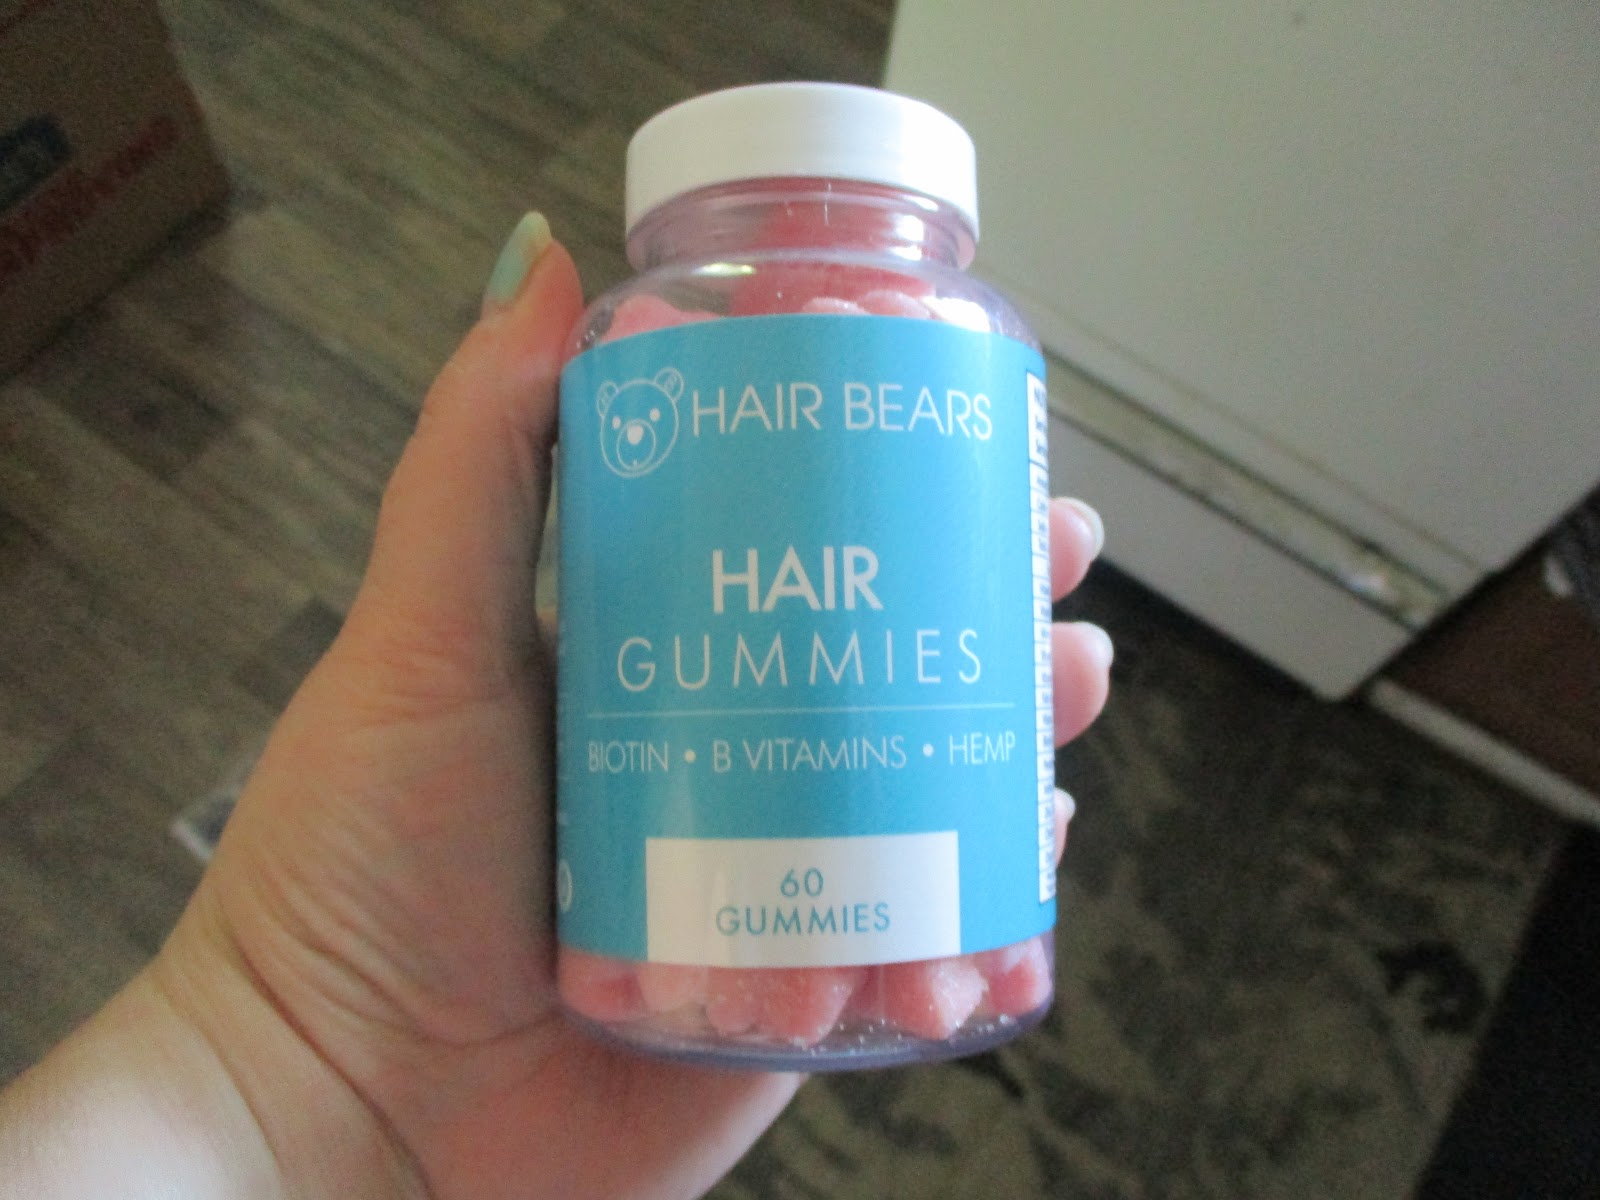 1. Blue Bear Gummies for Hair Reviews on Amazon - wide 4